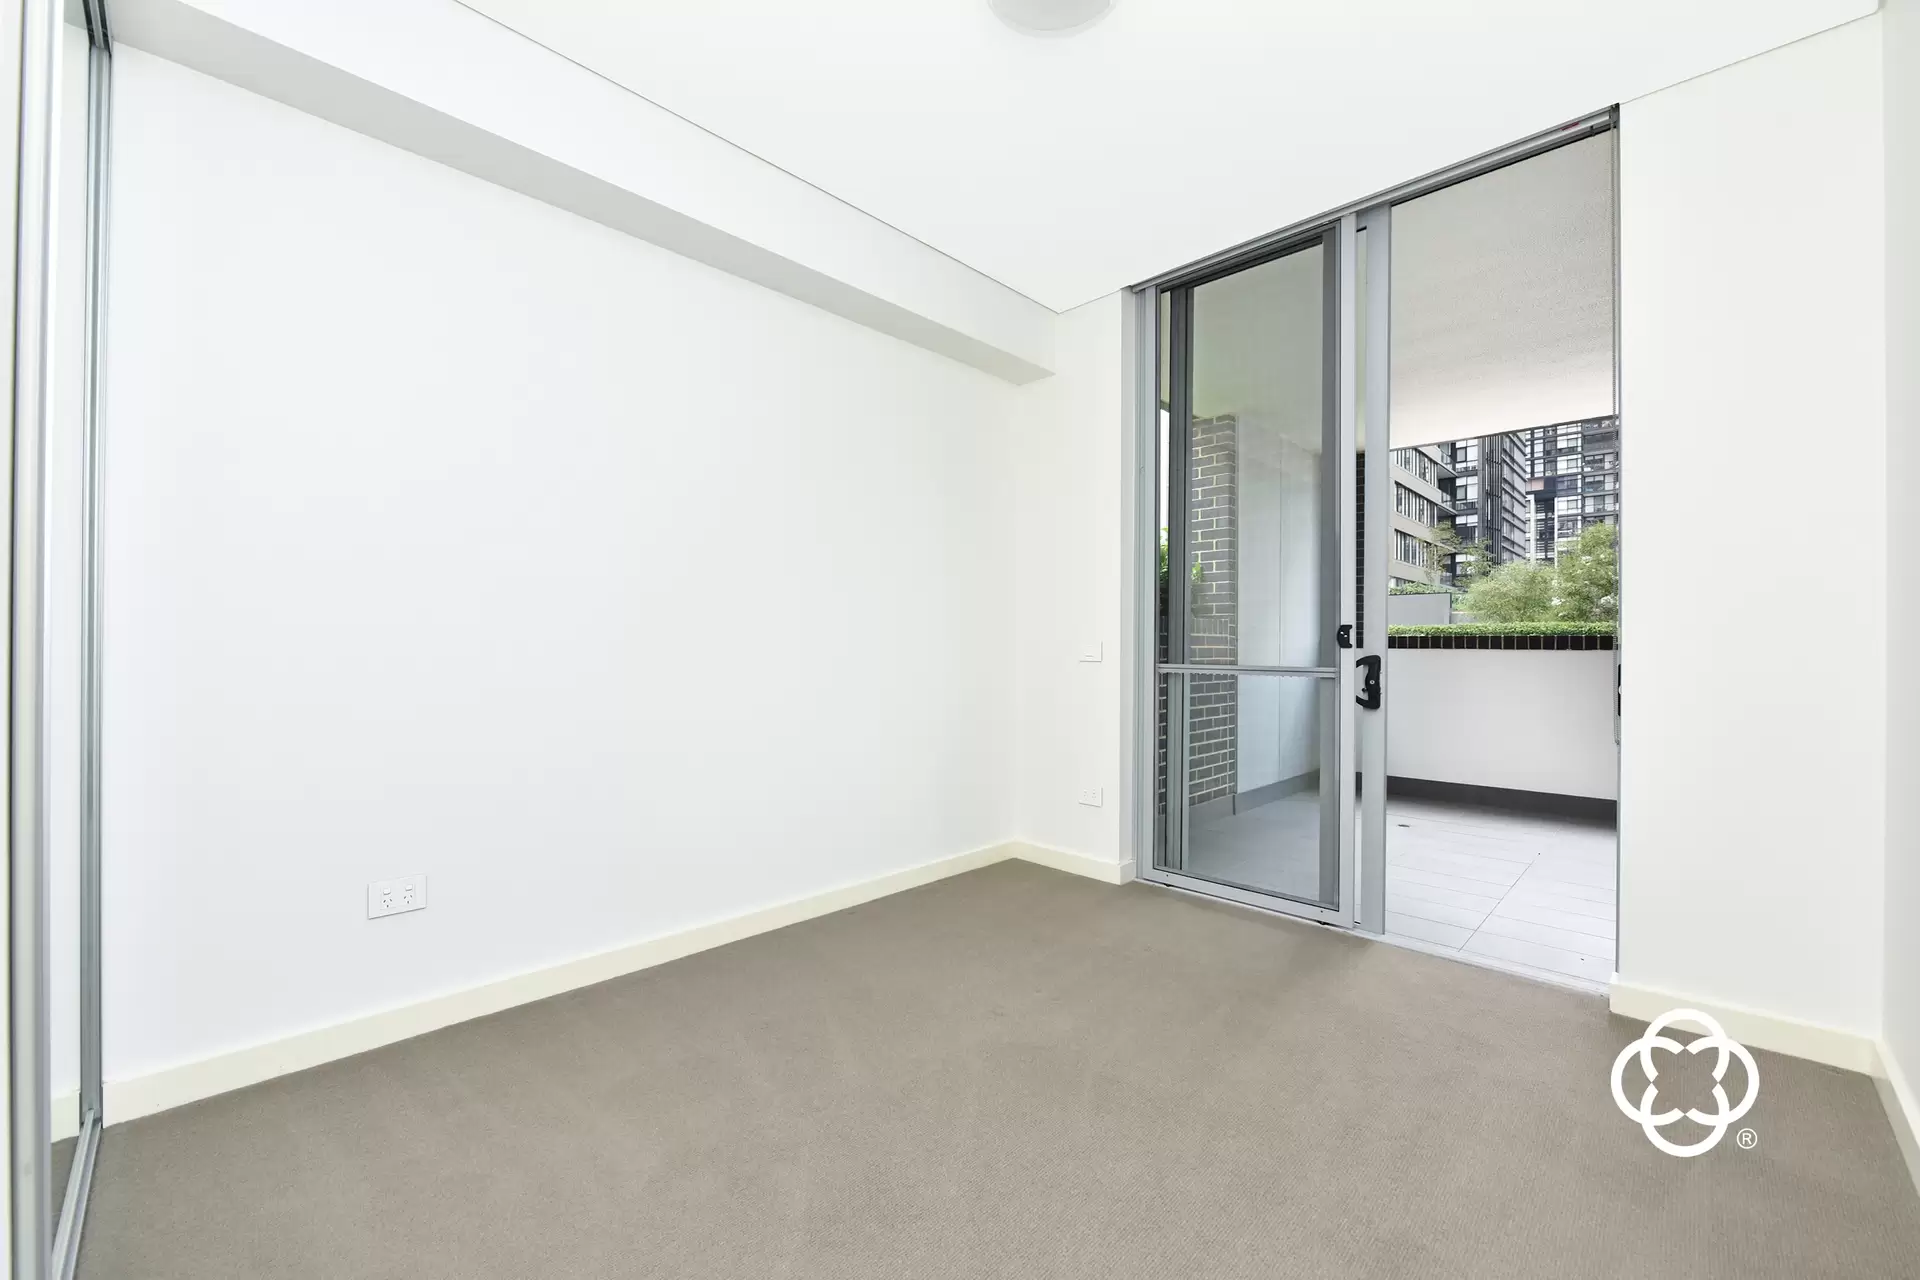 218/5 Verona Drive, Wentworth Point Leased by Chidiac Realty - image 1